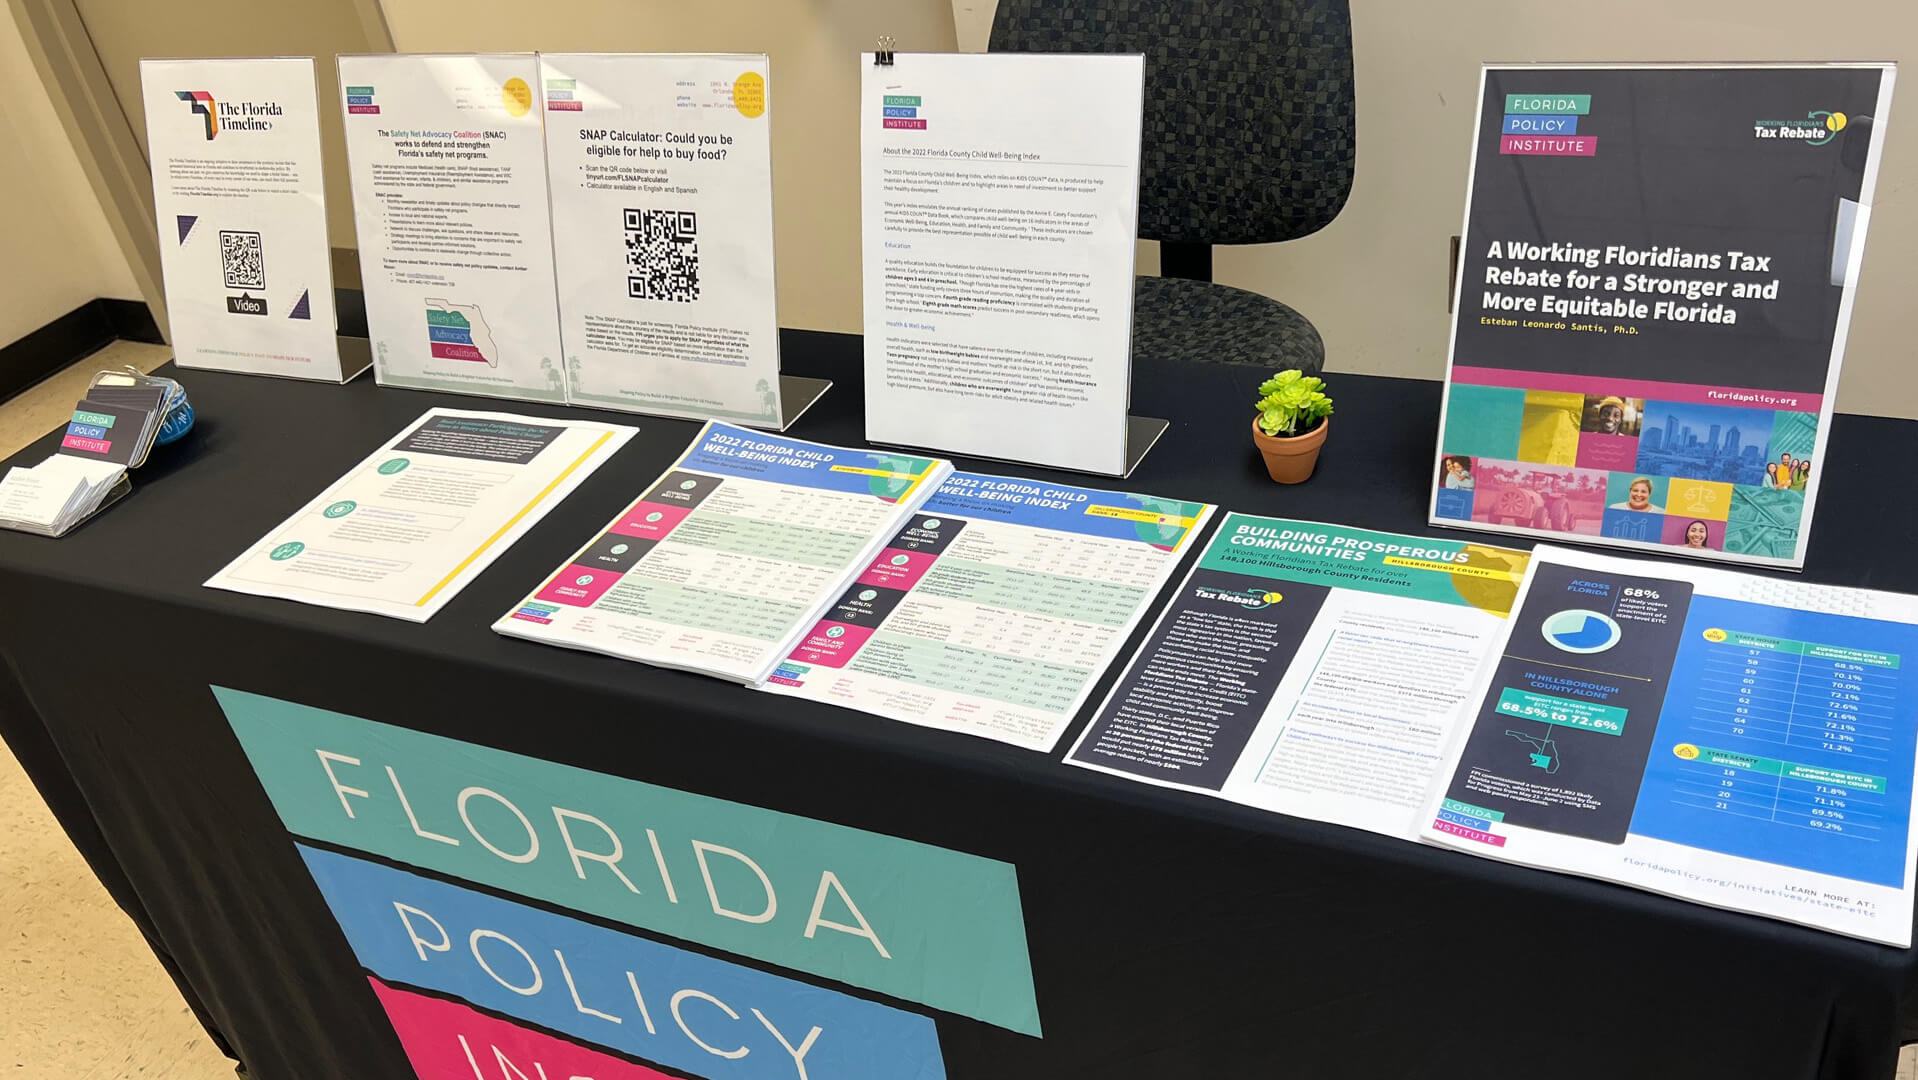 Florida Policy Institute sharing policy resources at the United Way Suncoast Taxathon event with all-day free tax preparation and community resources, 2023